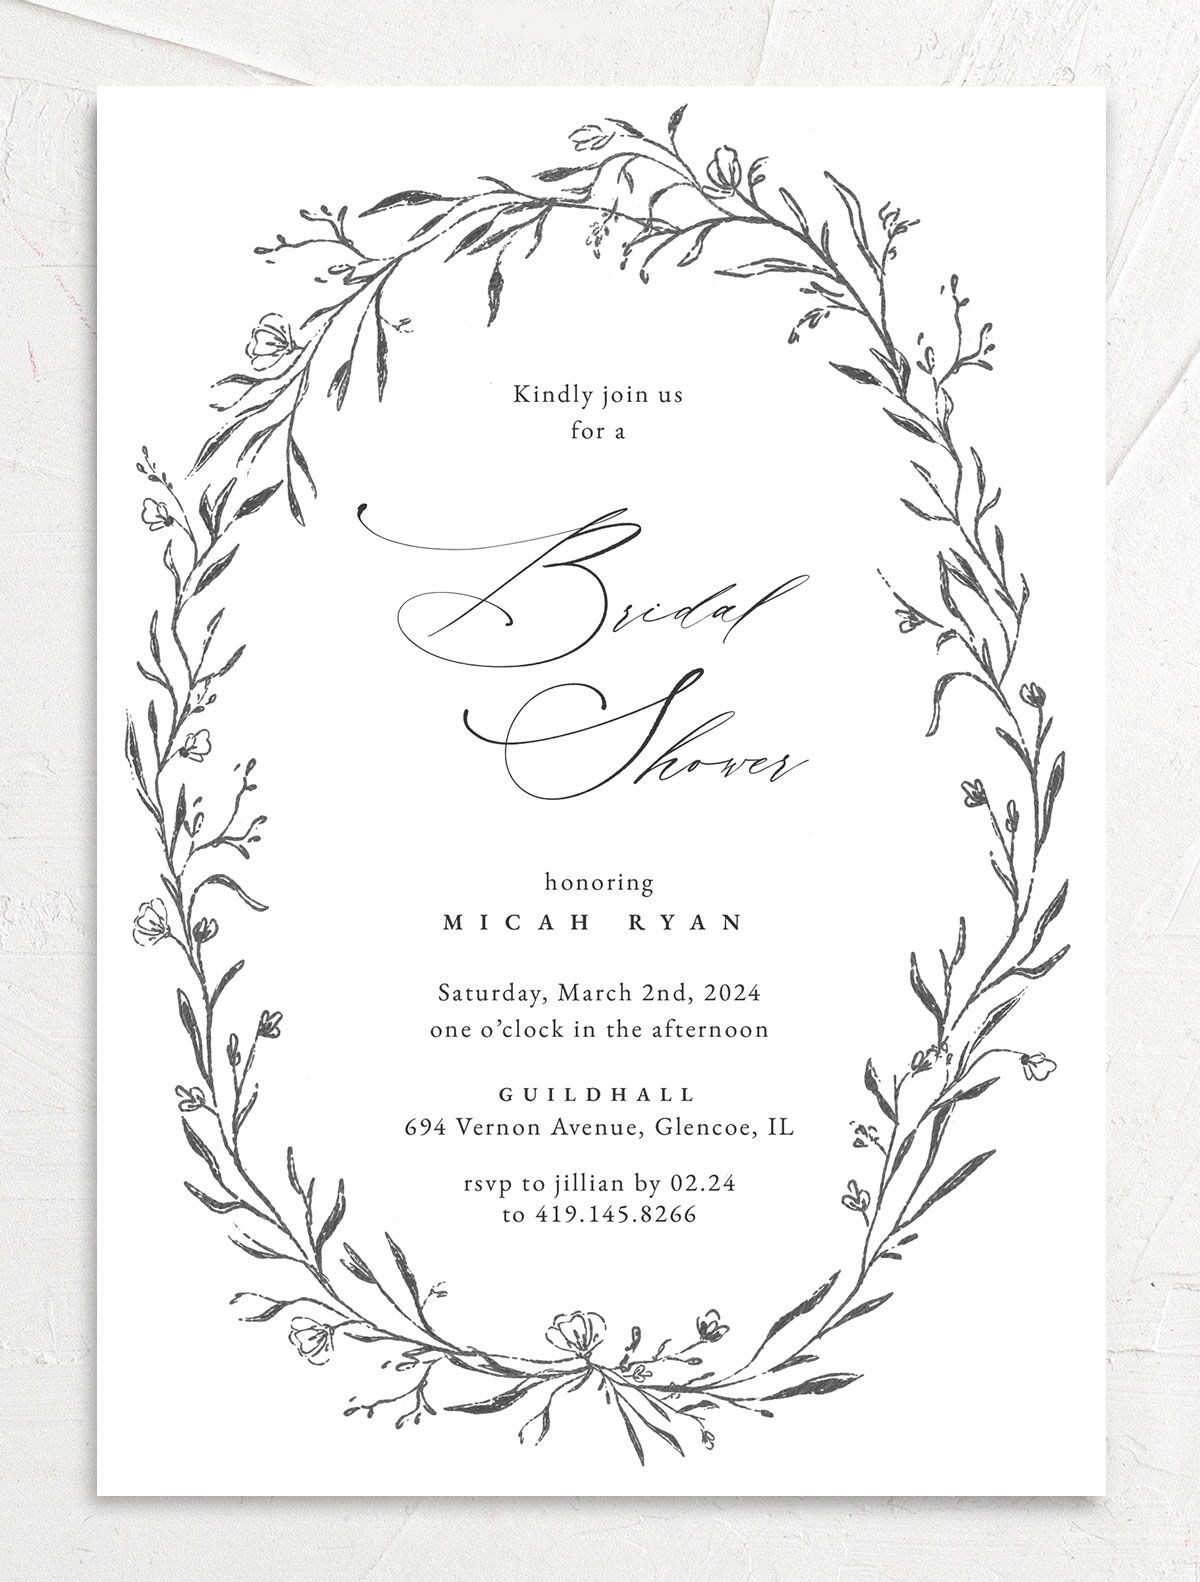 Rustic Garland Bridal Shower Invitations front in Silver